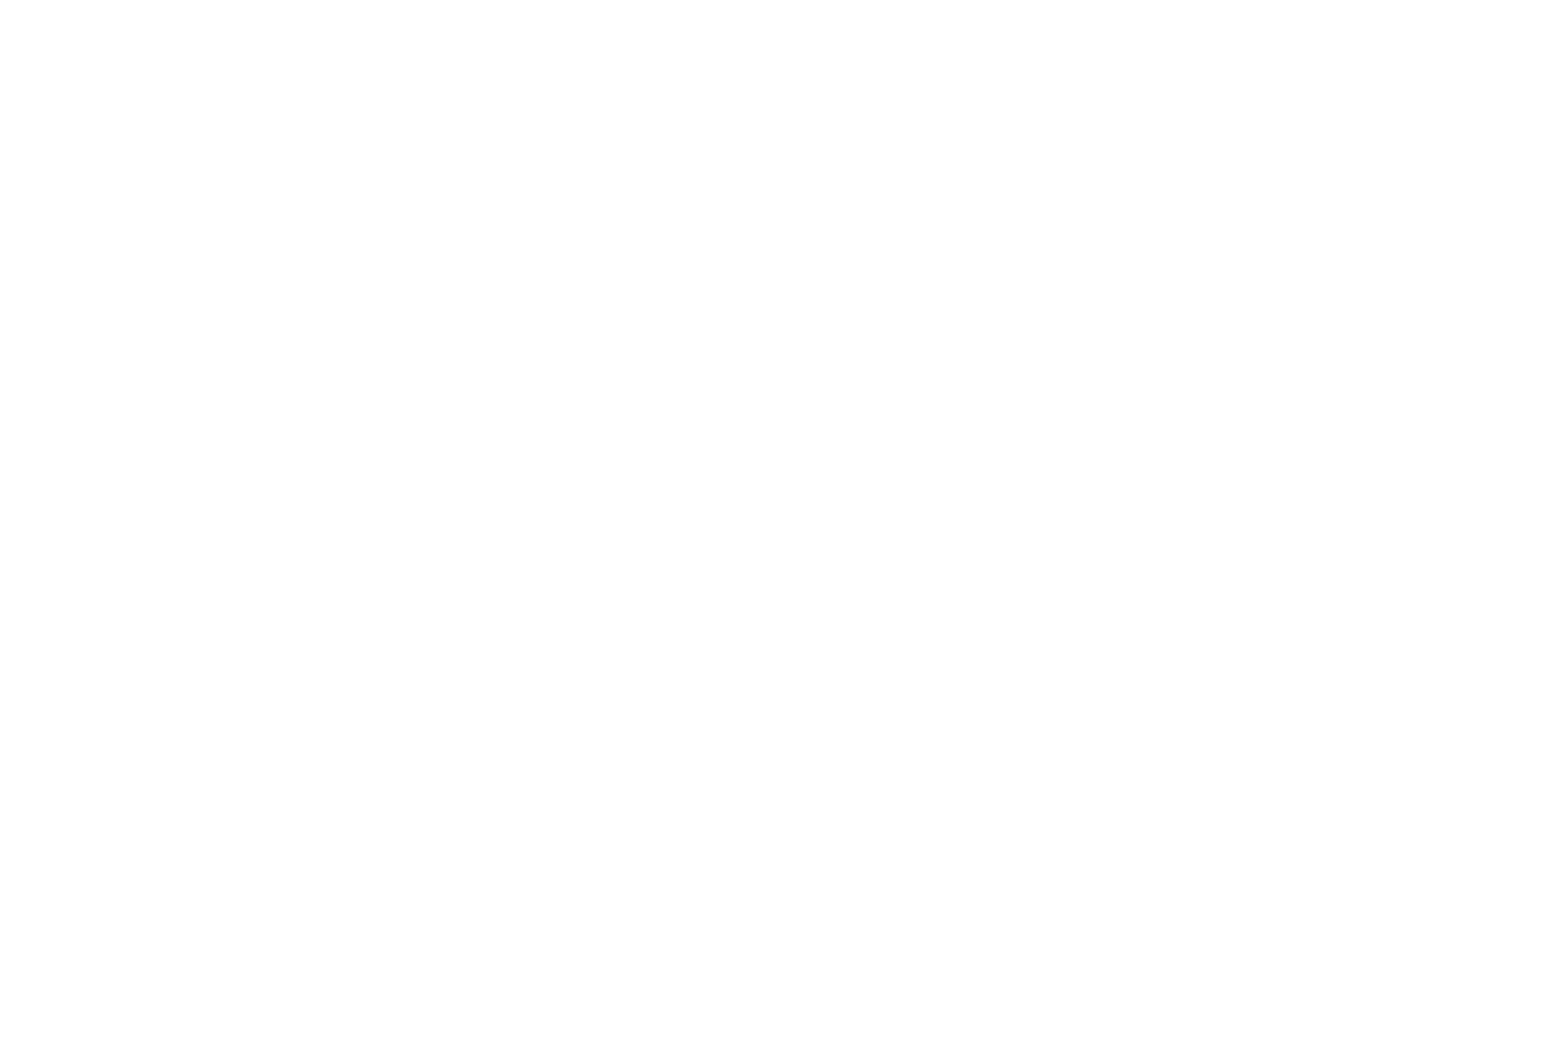 The Lottery Corporation logo large for dark backgrounds (transparent PNG)